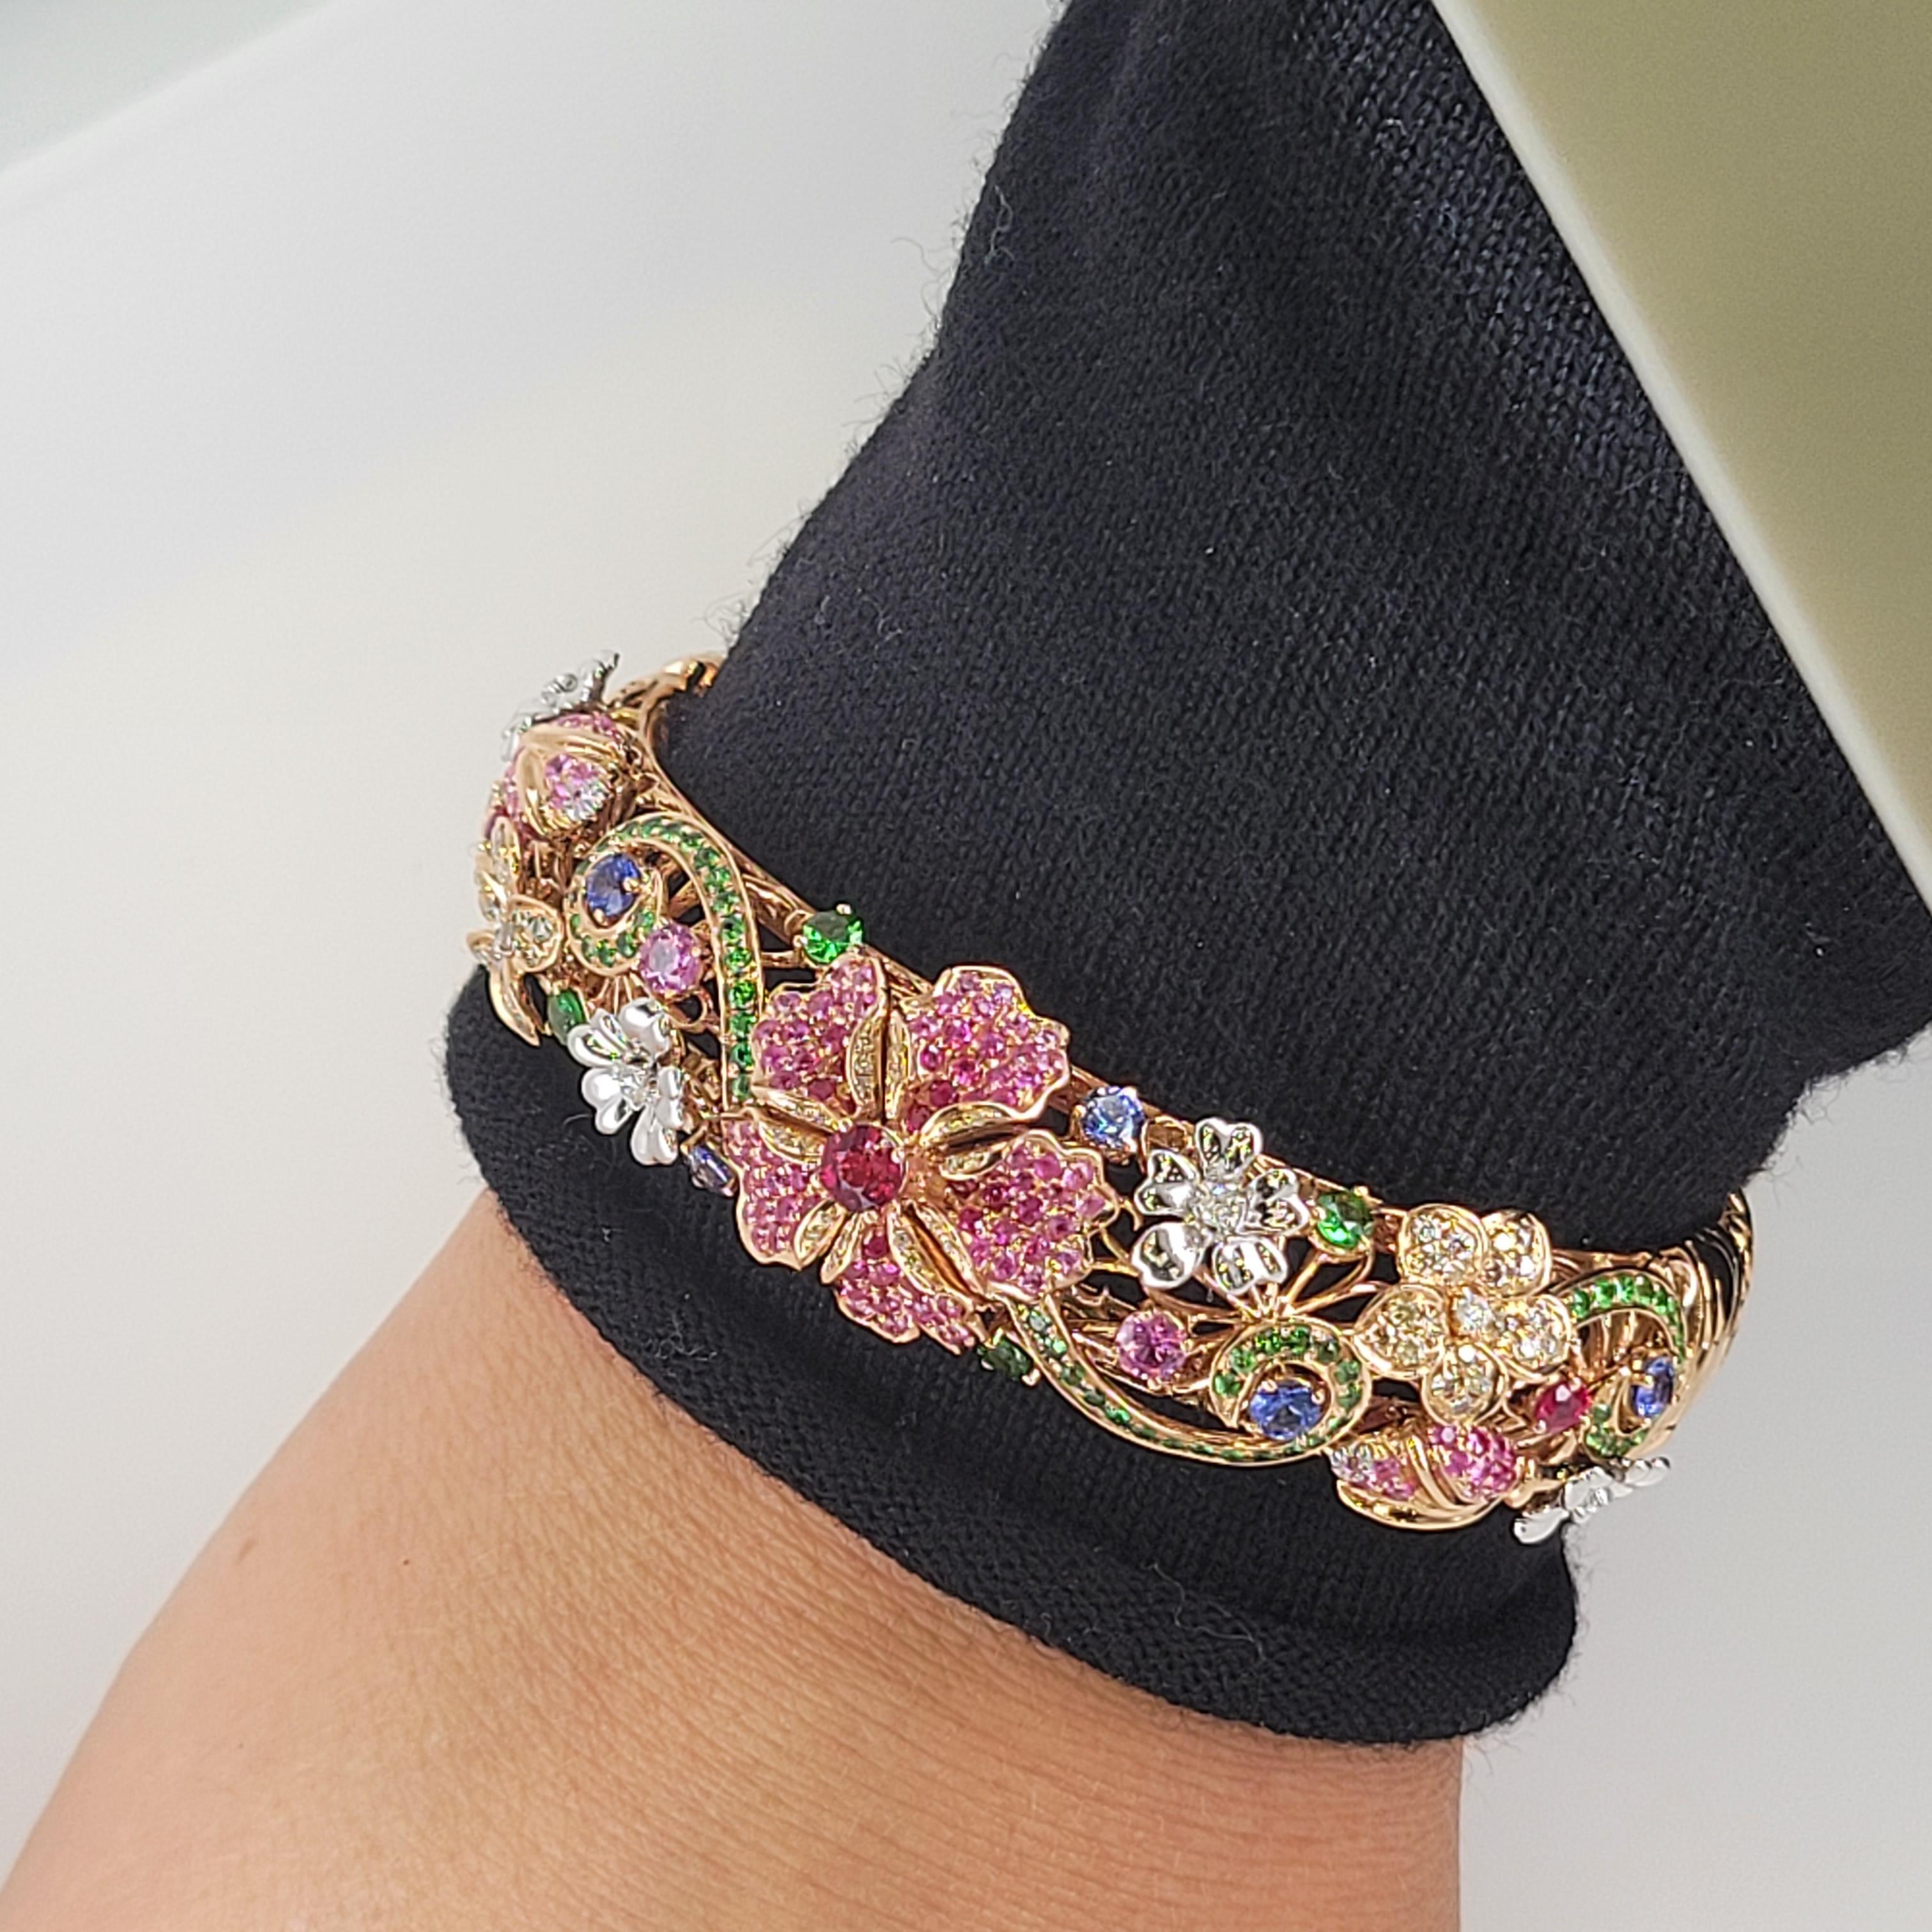 18k Flower Garden Collection Bracelet with Diamonds, Tourmaline, Sapphires, Ruby For Sale 1